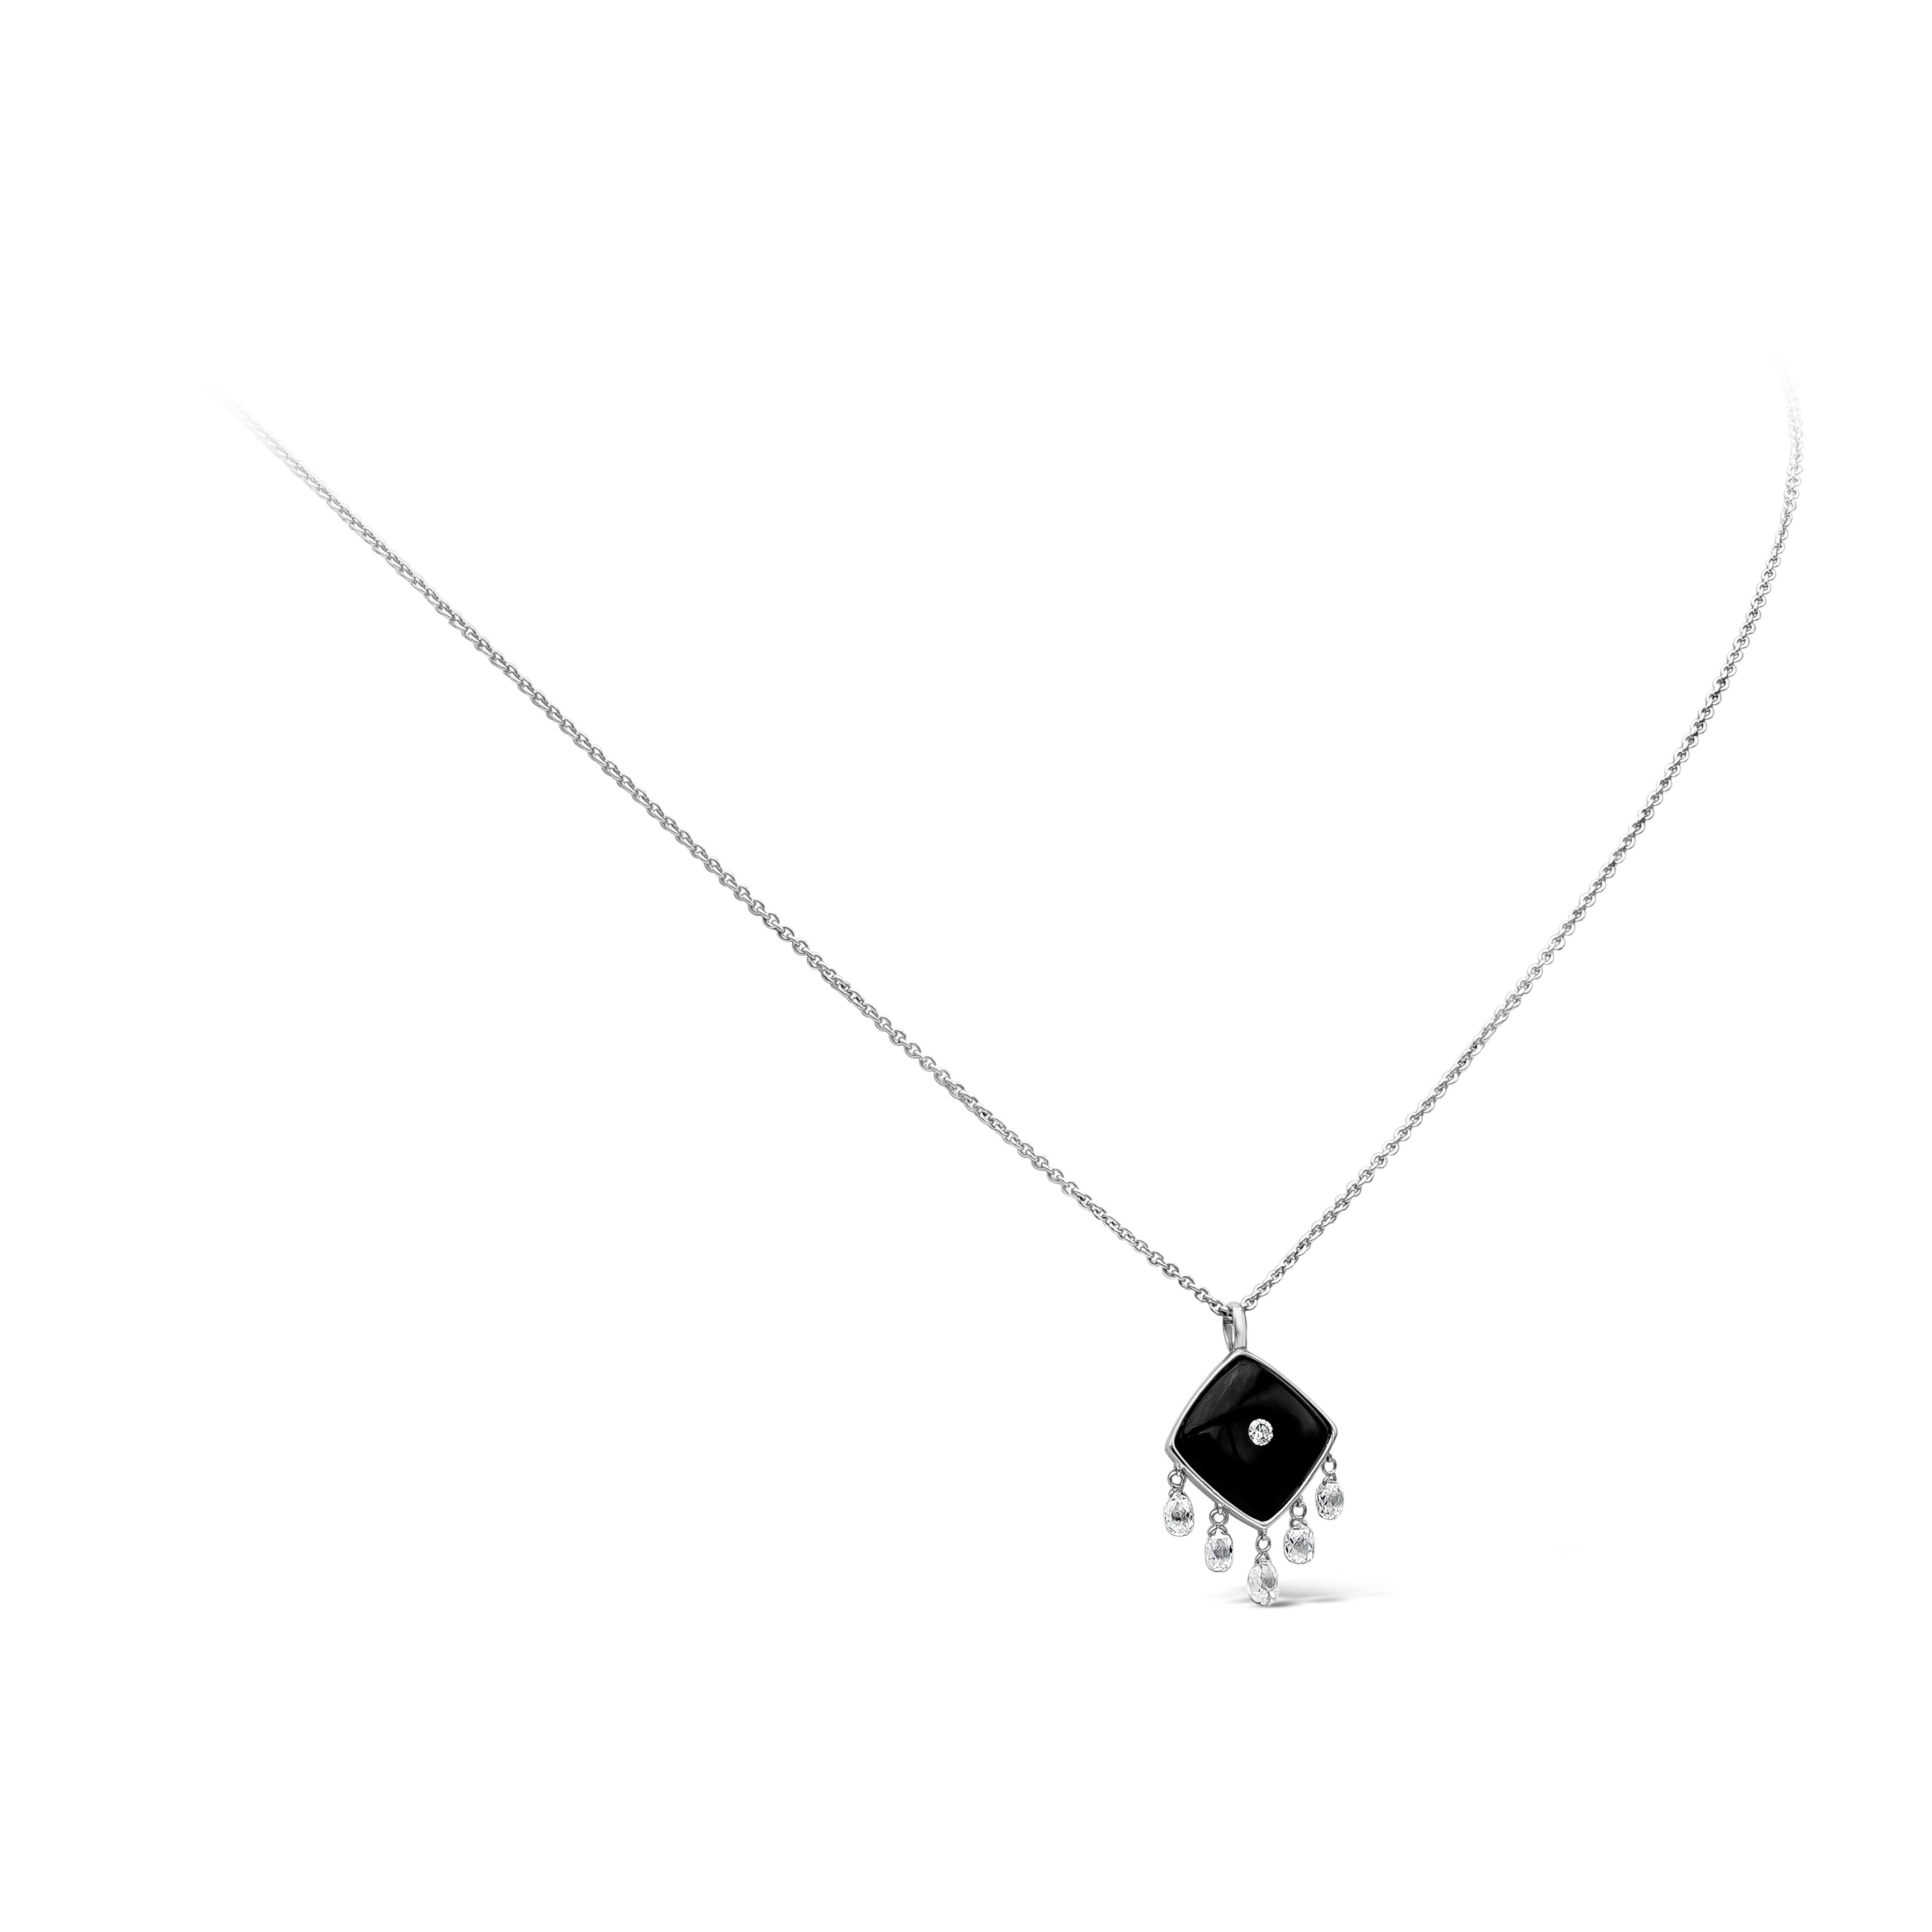 A stylish drop necklace showcasing a cushion cut black onyx that weighs at 3.60 carats total with a brilliant round diamond that is placed on the center. The weight of the round diamond is about 0.02 carats in total. On the bottom hangs five